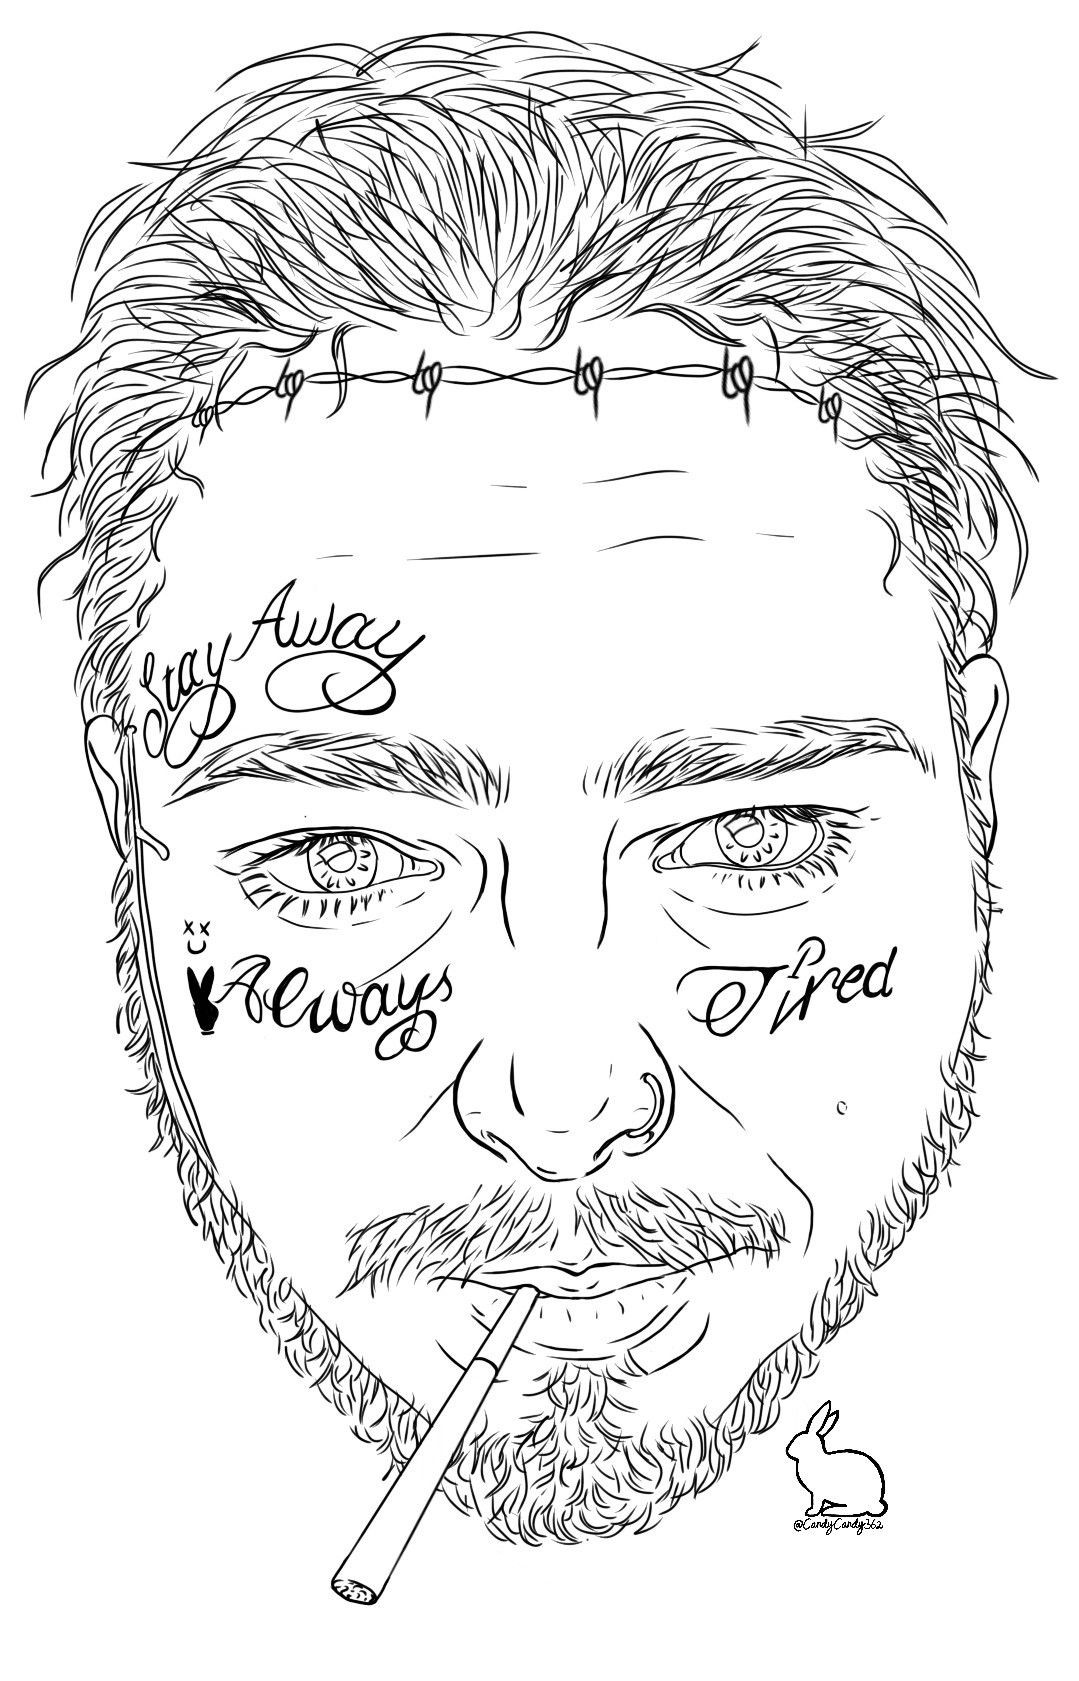 Coloring Sheets For Kids Post Malone Free
 Post Malone new face tats artwork in progress